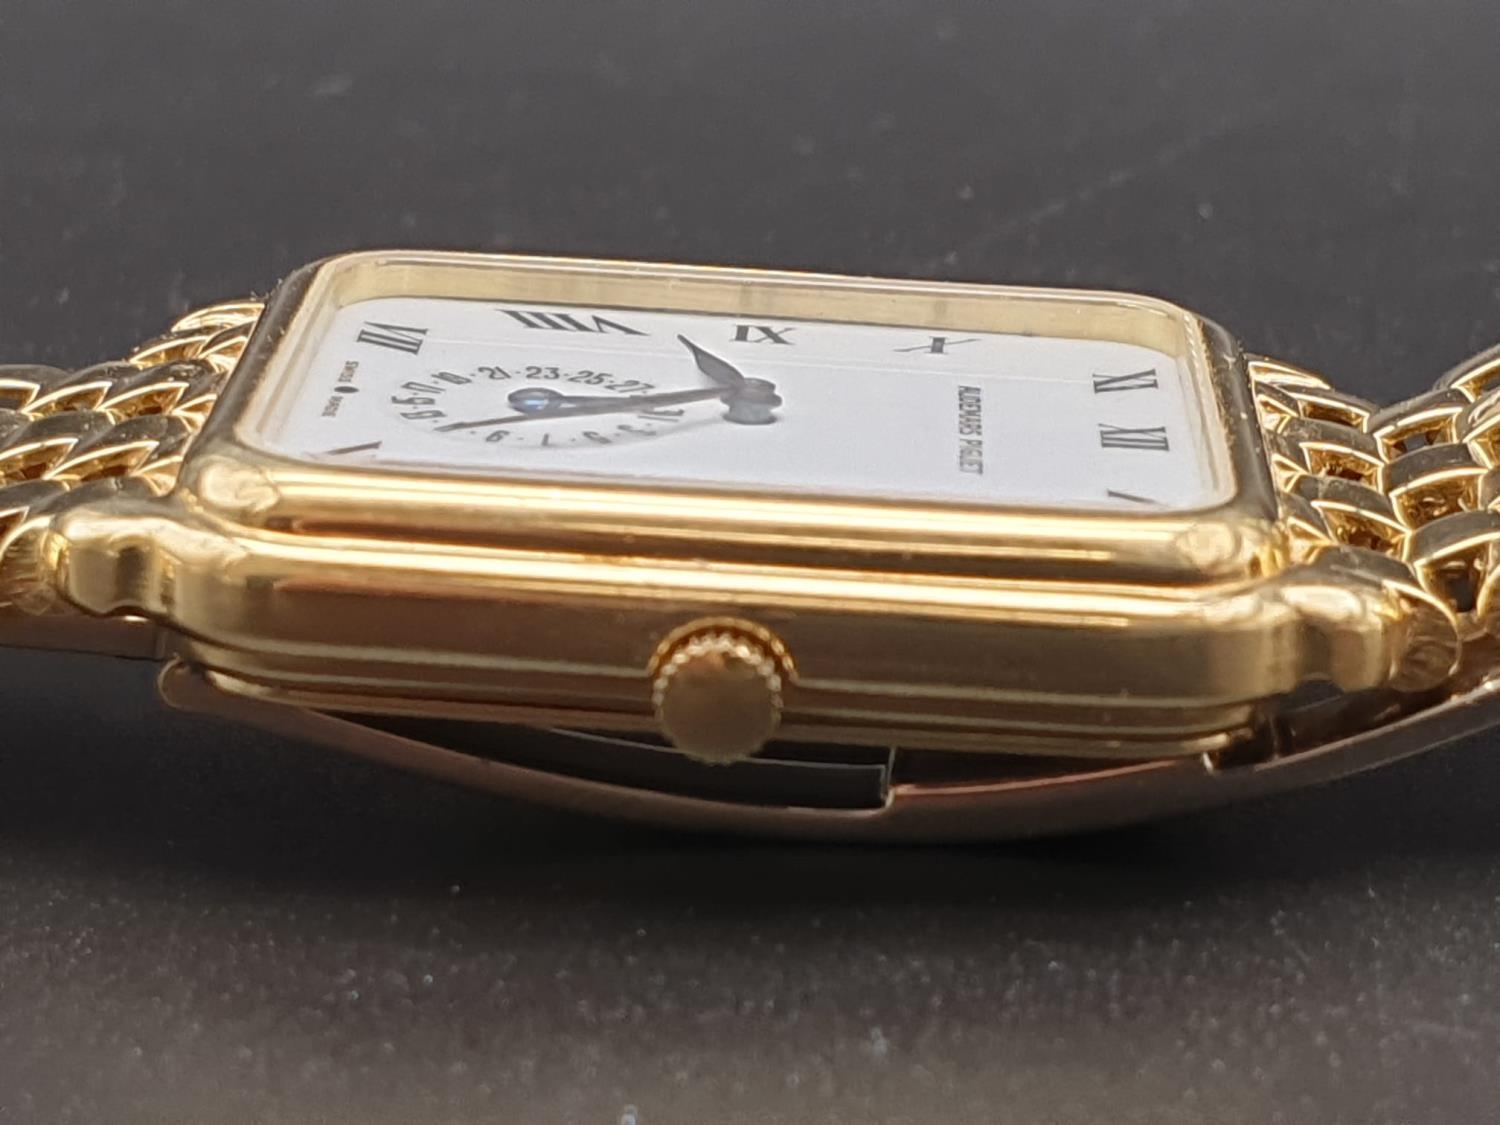 AUDEMARS PIGUET 18K GOLD WATCH WITH GOLD STRAP, SQUARE FACE AND MANUAL MOVEMENT. 26MM - Image 12 of 12